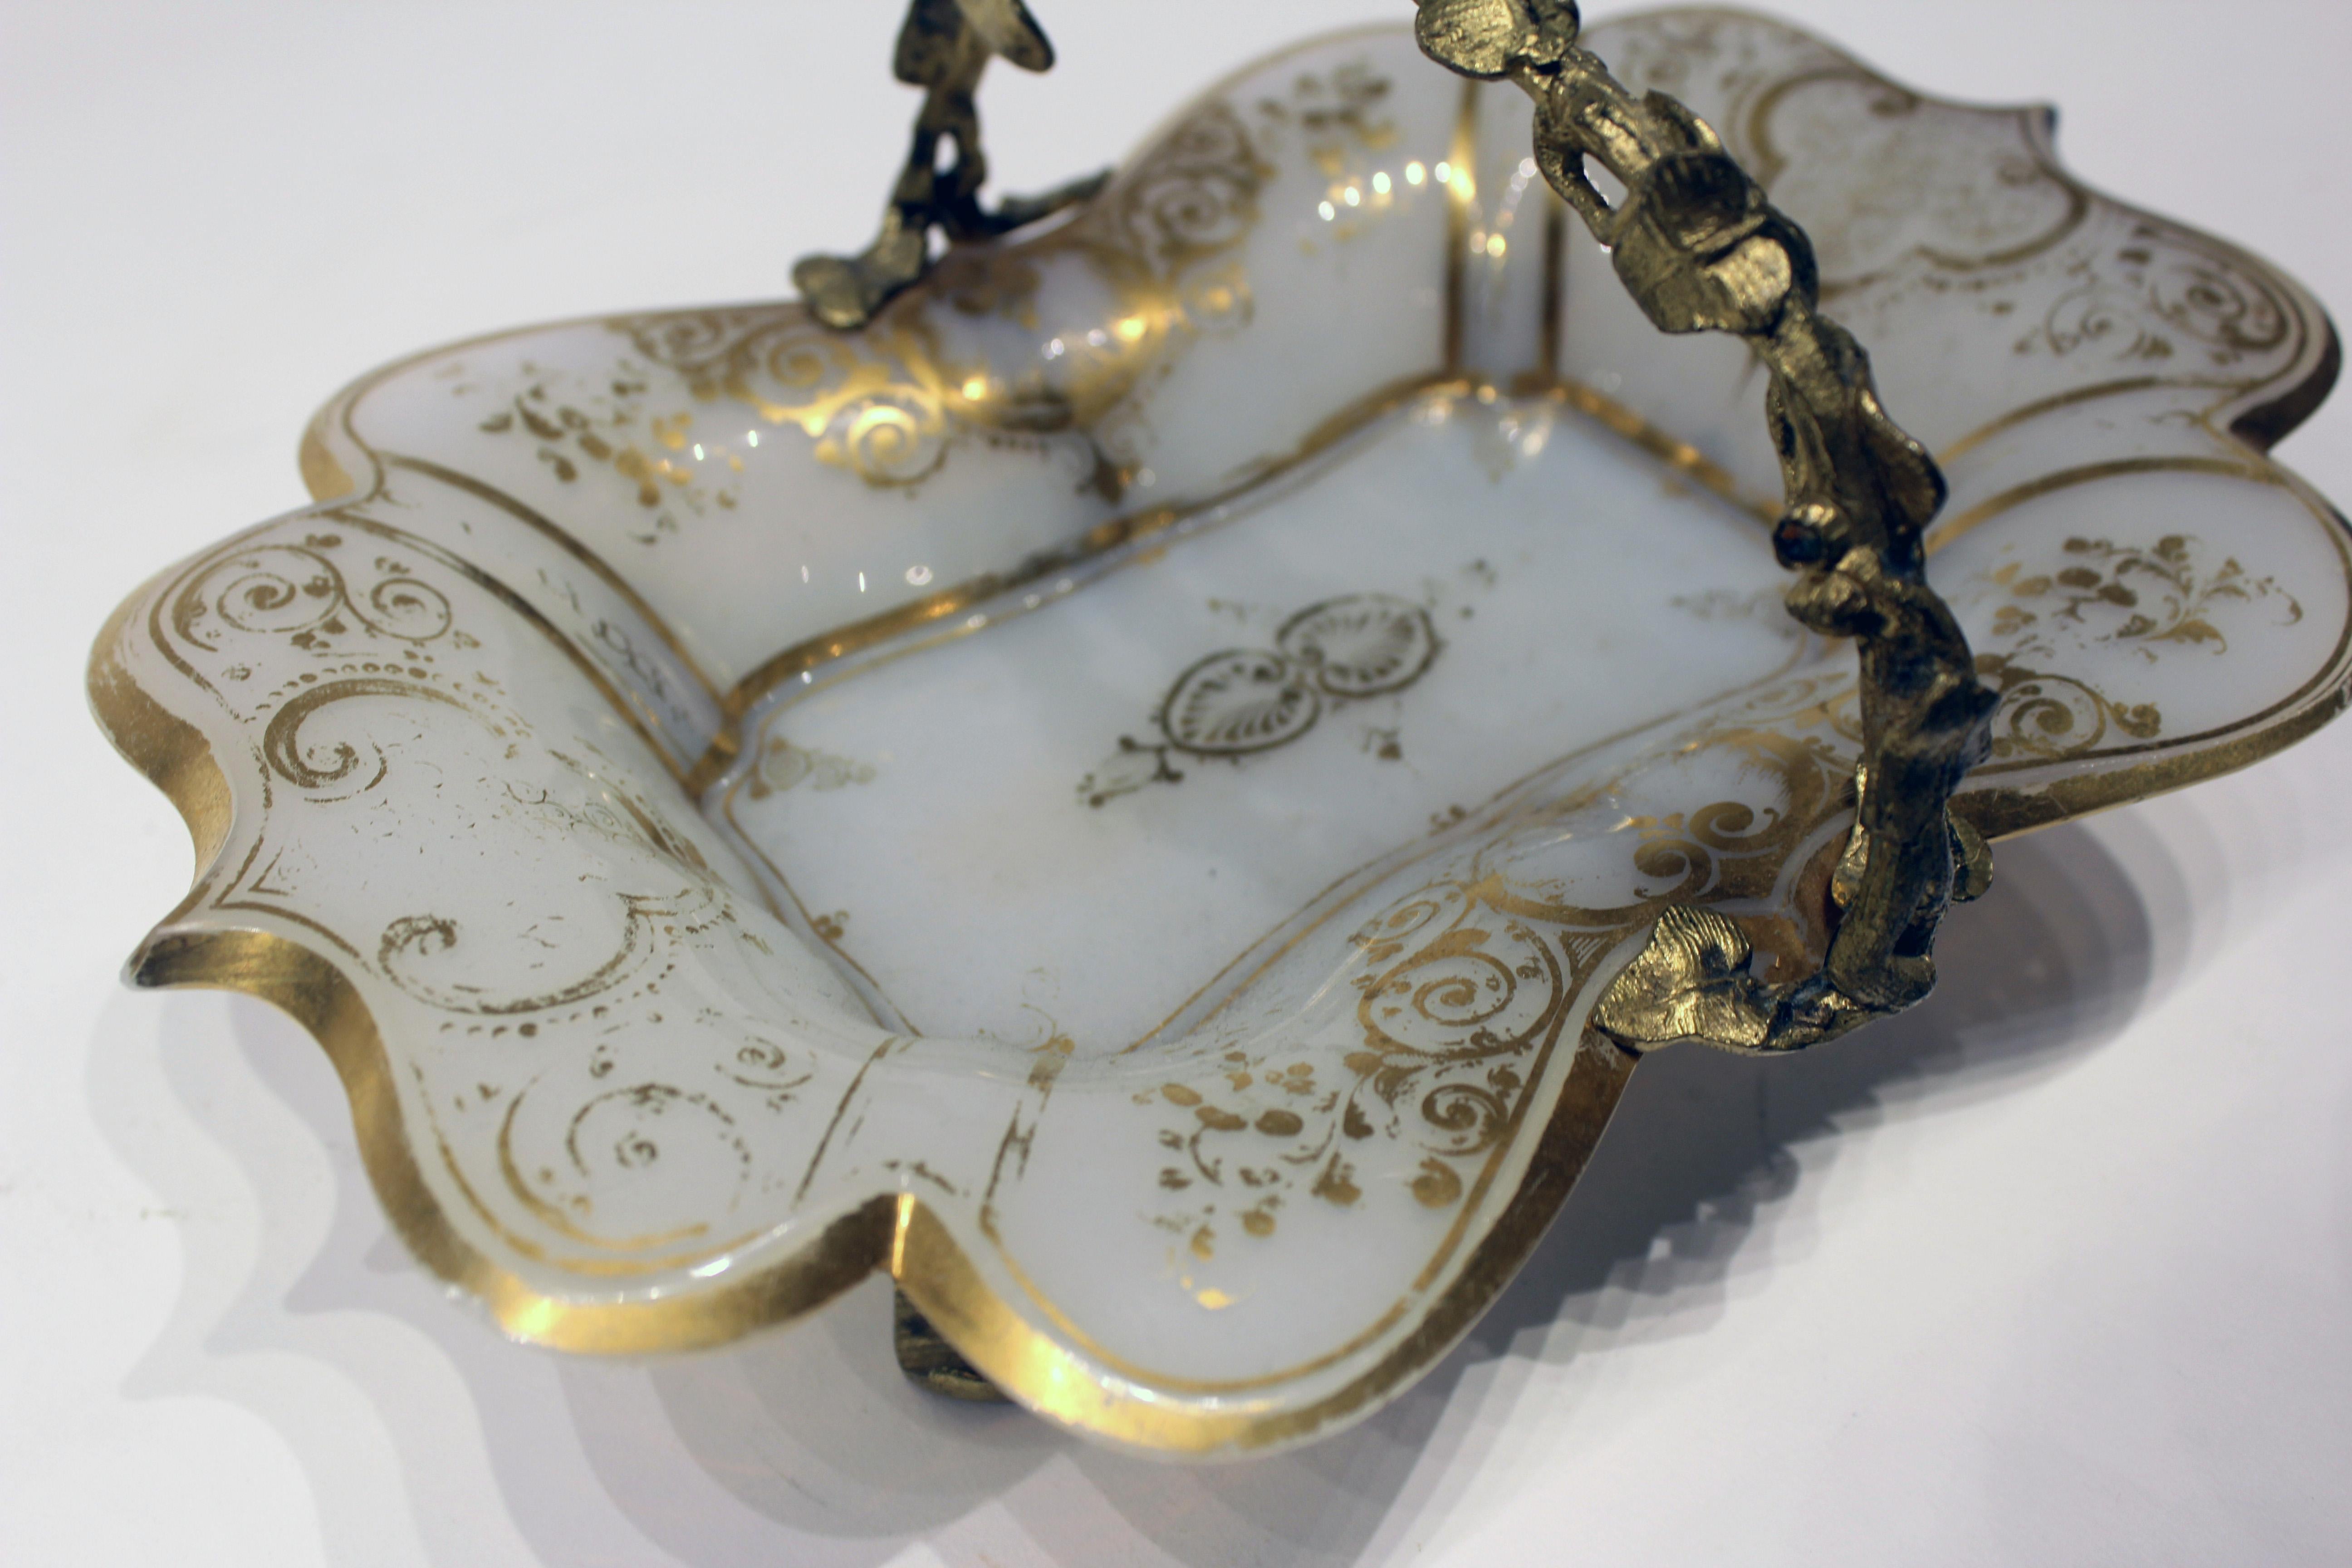 Mid-19th century opaline and bronze mounted handled candy dish with gilding on opaline glass.